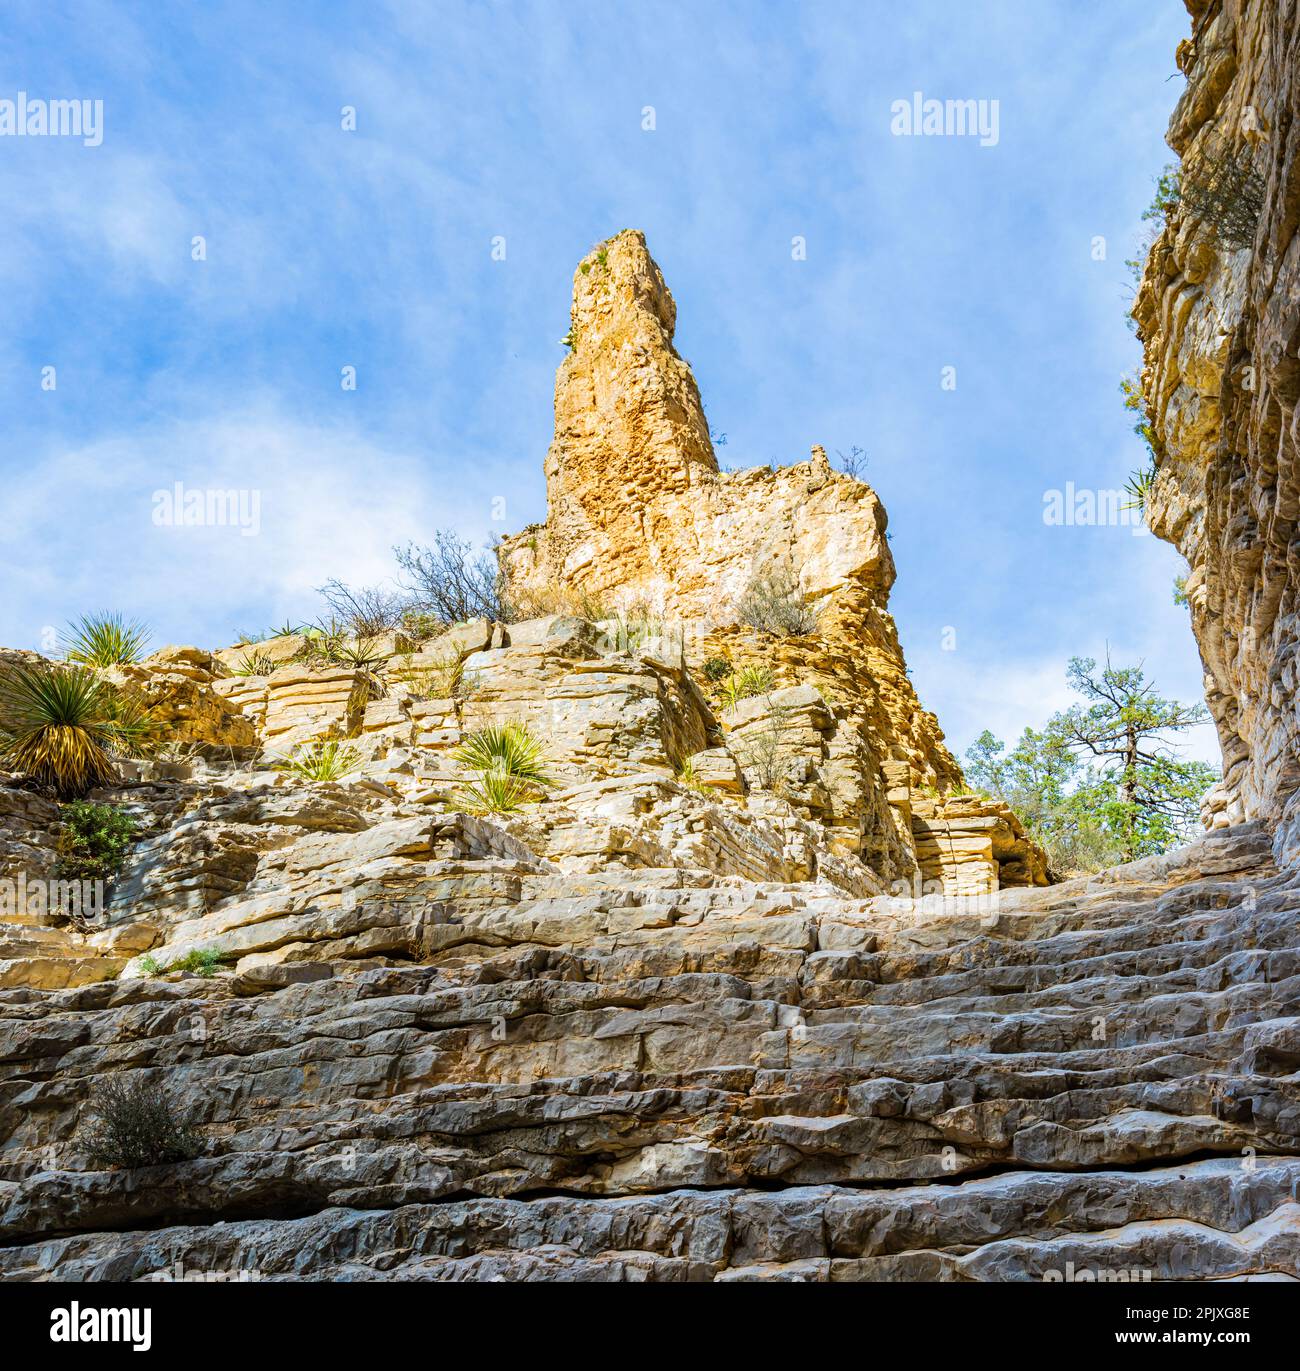 The Limestone Terraced Hiker's Staircase on The Devil's Hall Trail in Pine Springs Canyon, Guadalupe Mountains National Park, Texas, USA Stock Photo